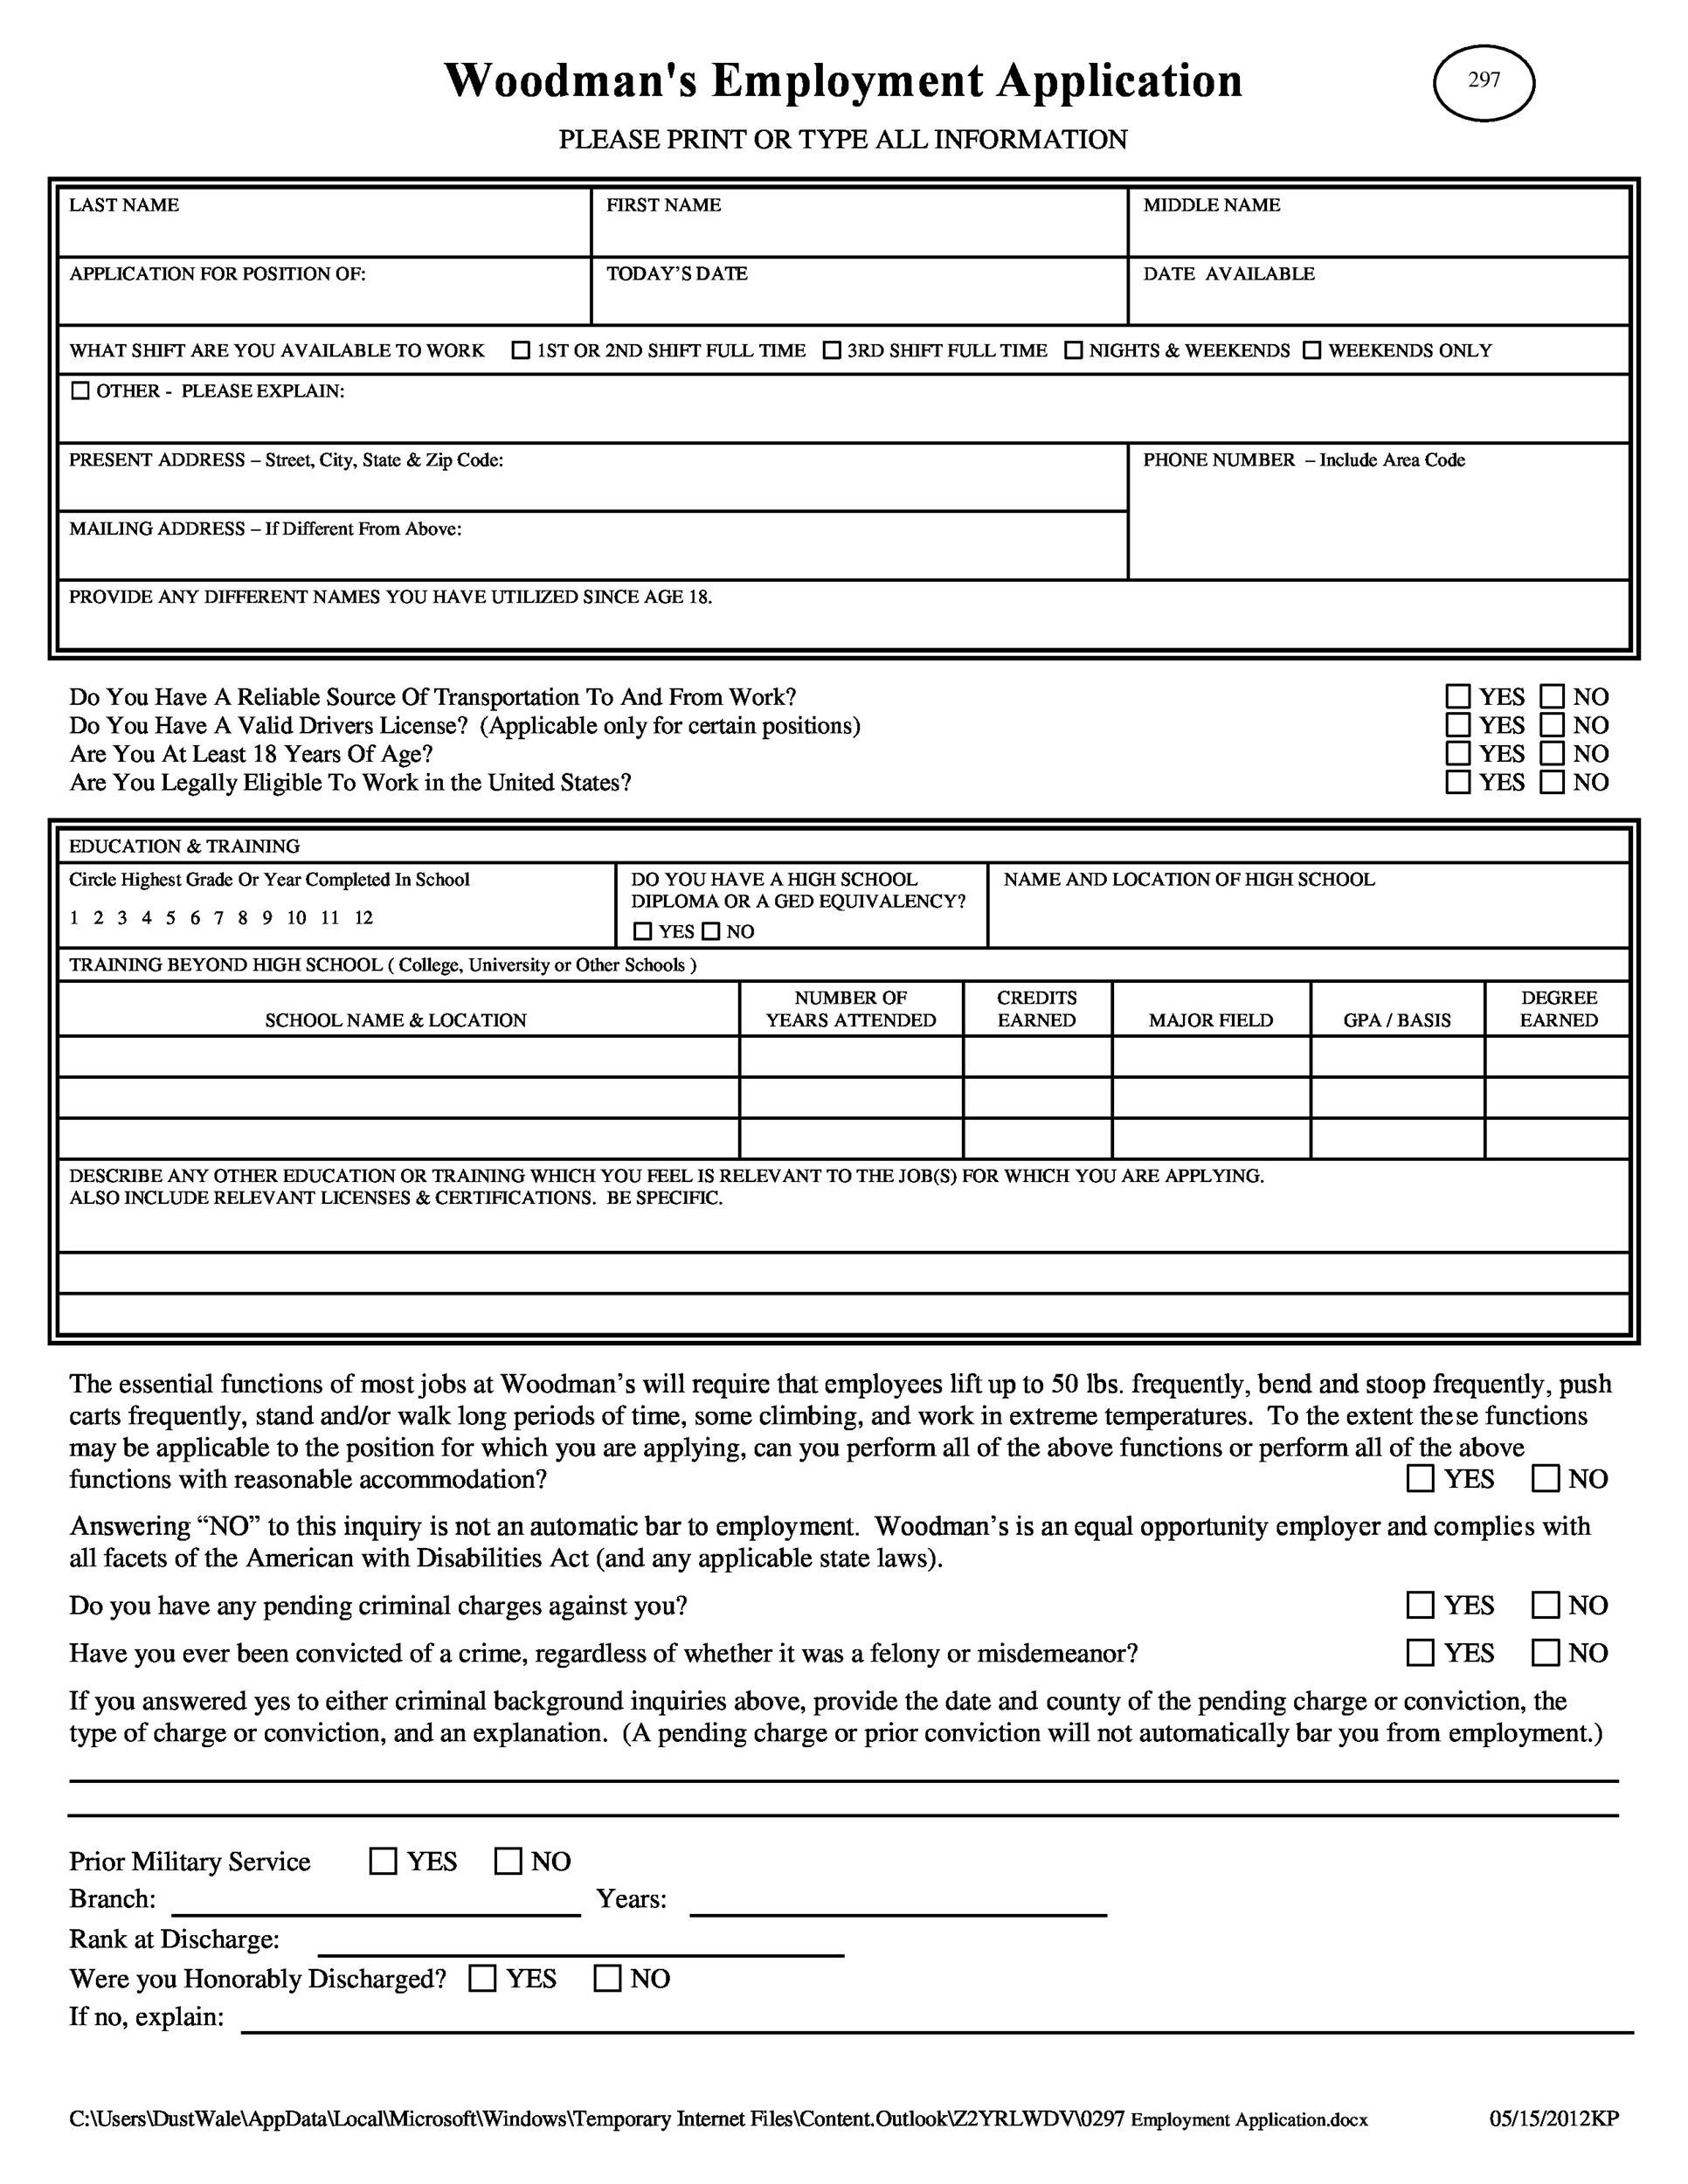 Employment Application Form Template Free Download from templatelab.com